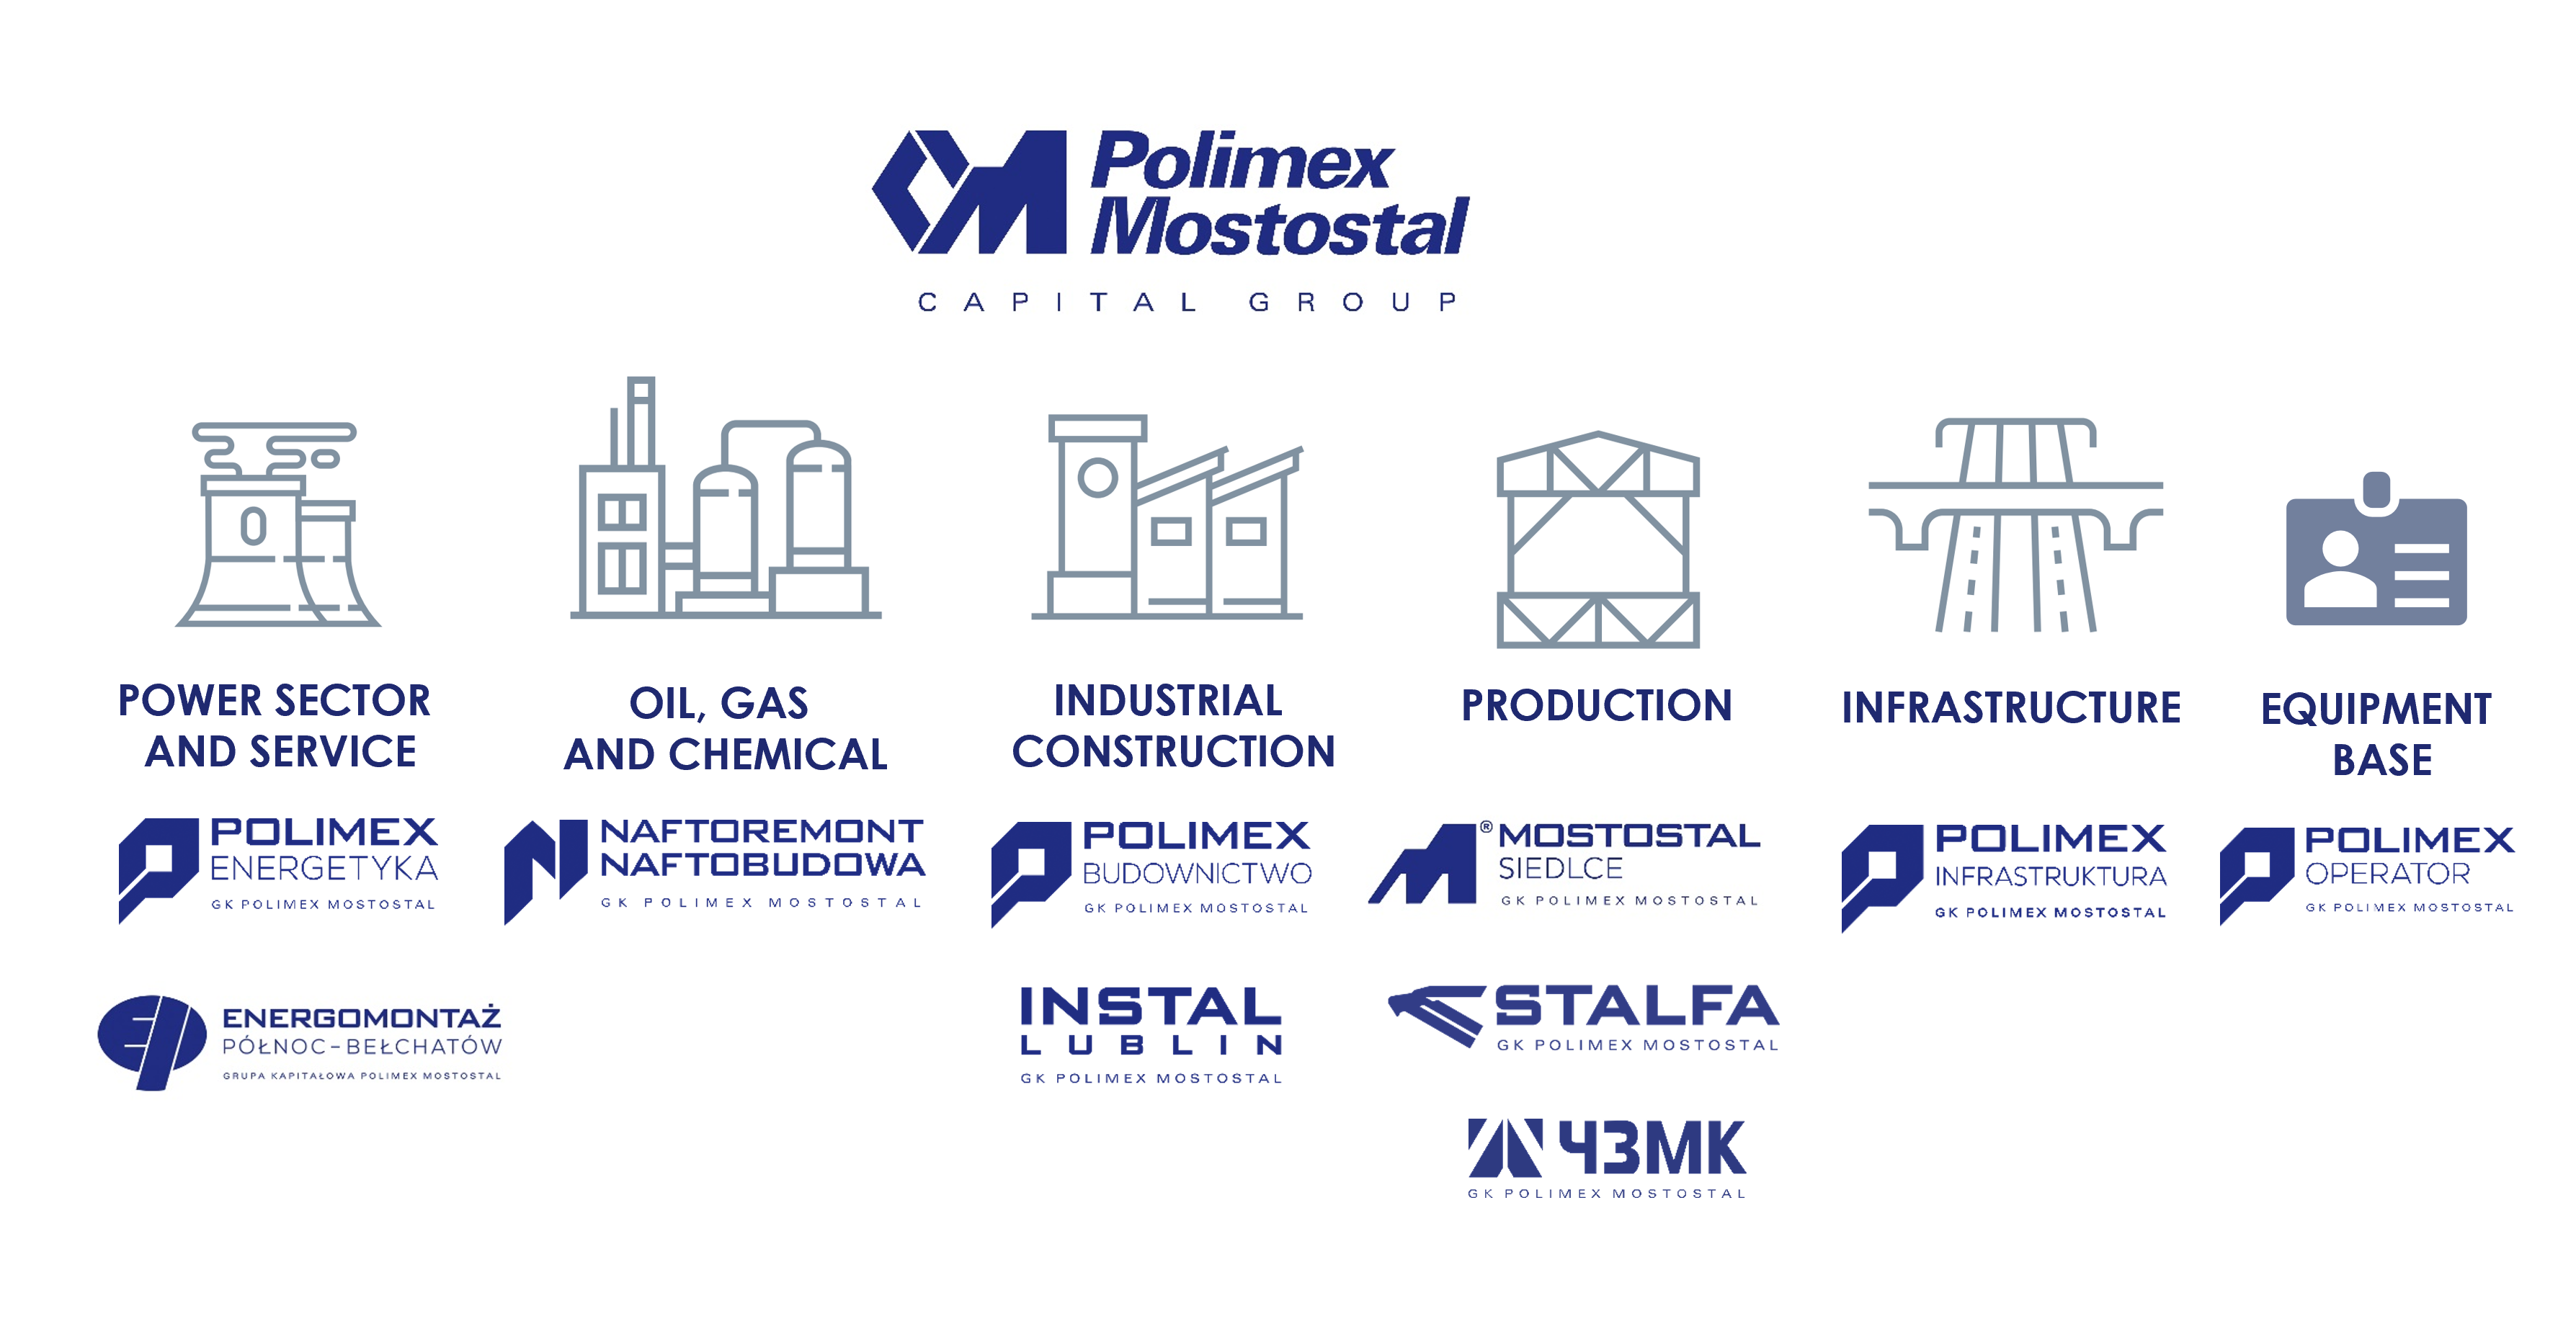 The structure of the Polimex Mostostal S.A.